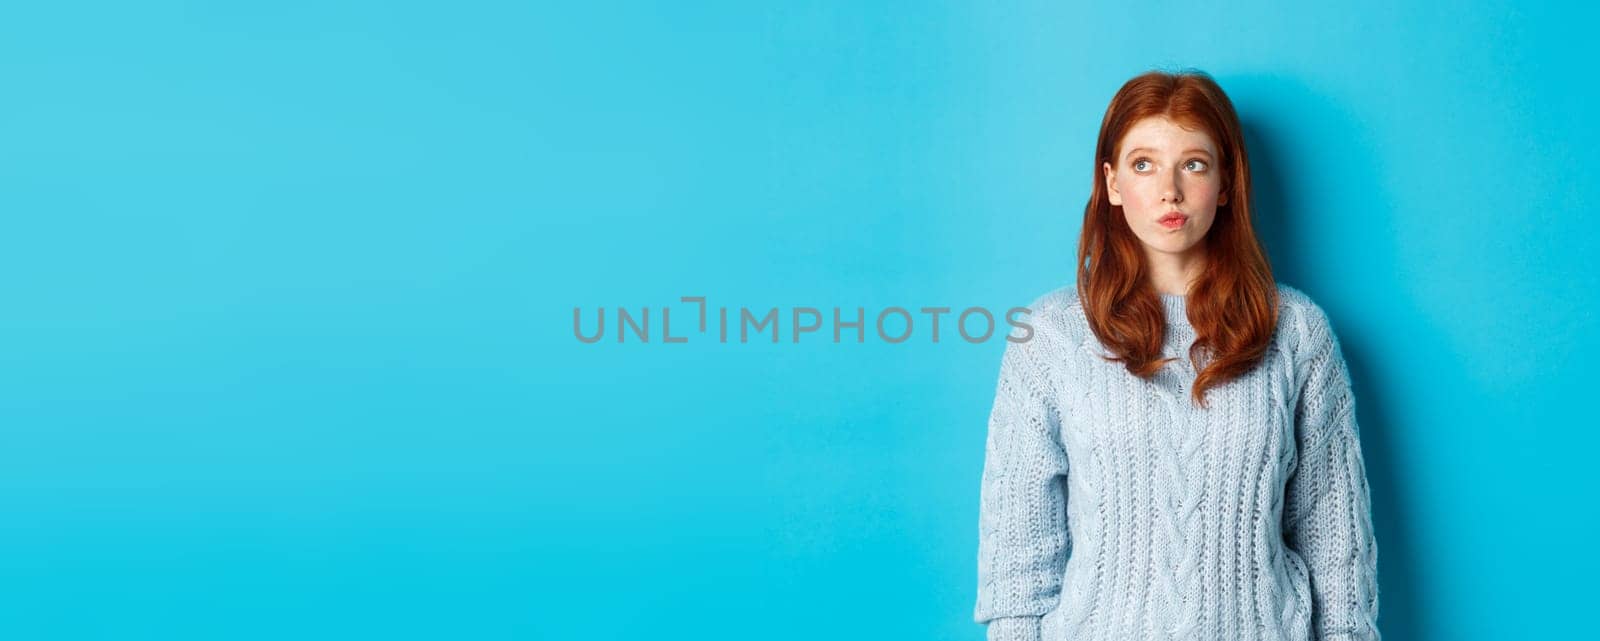 Dreamy redhead girl thinking or making decision, looking at upper left corner logo, standing against blue background.